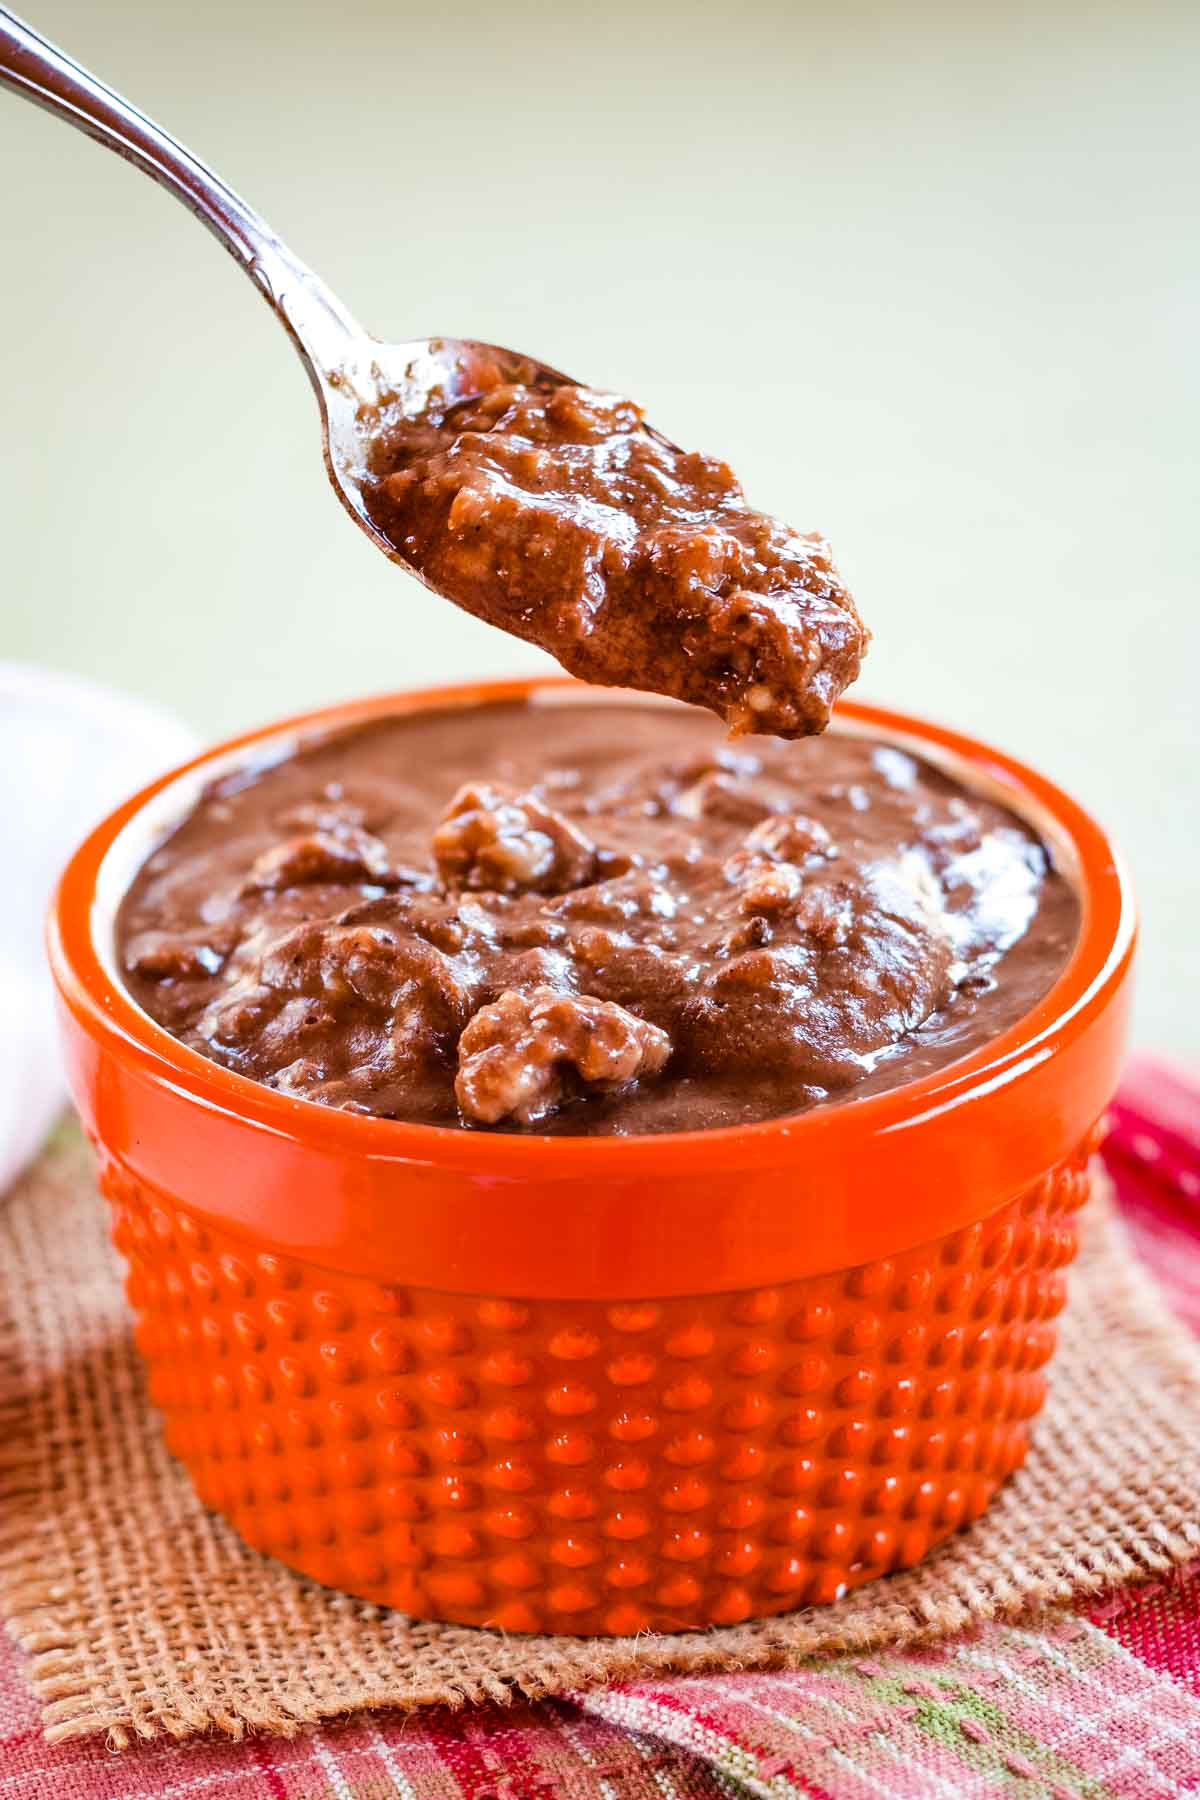 Pumpkin Spice Chocolate Pudding Oatmeal is an indulgent but healthy breakfast filled with fall flavors. You can make it gluten free and vegan too! | cupcakesandkalechips.com